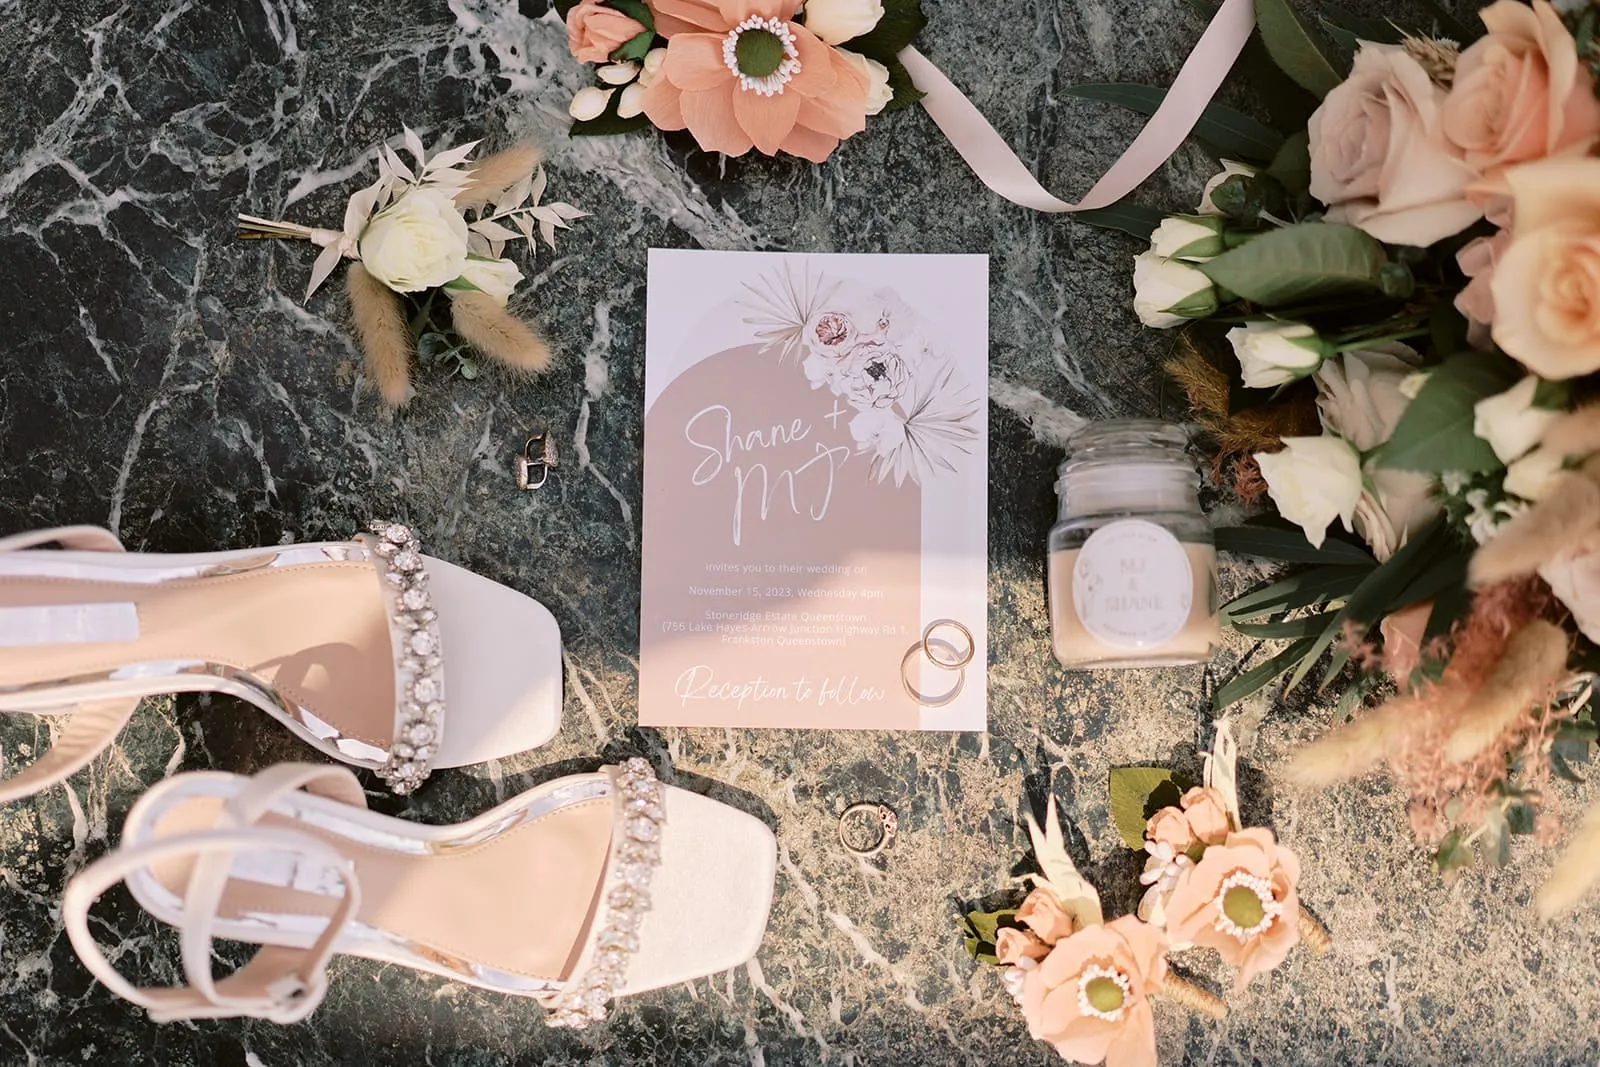 Queenstown Elopement Heli Wedding Photographer クイーンズタウン結婚式 | Mj & Shane's Stoneridge Queenstown Wedding showcases a stunning bouquet of flowers and elegant wedding shoes displayed on a beautiful marble table.